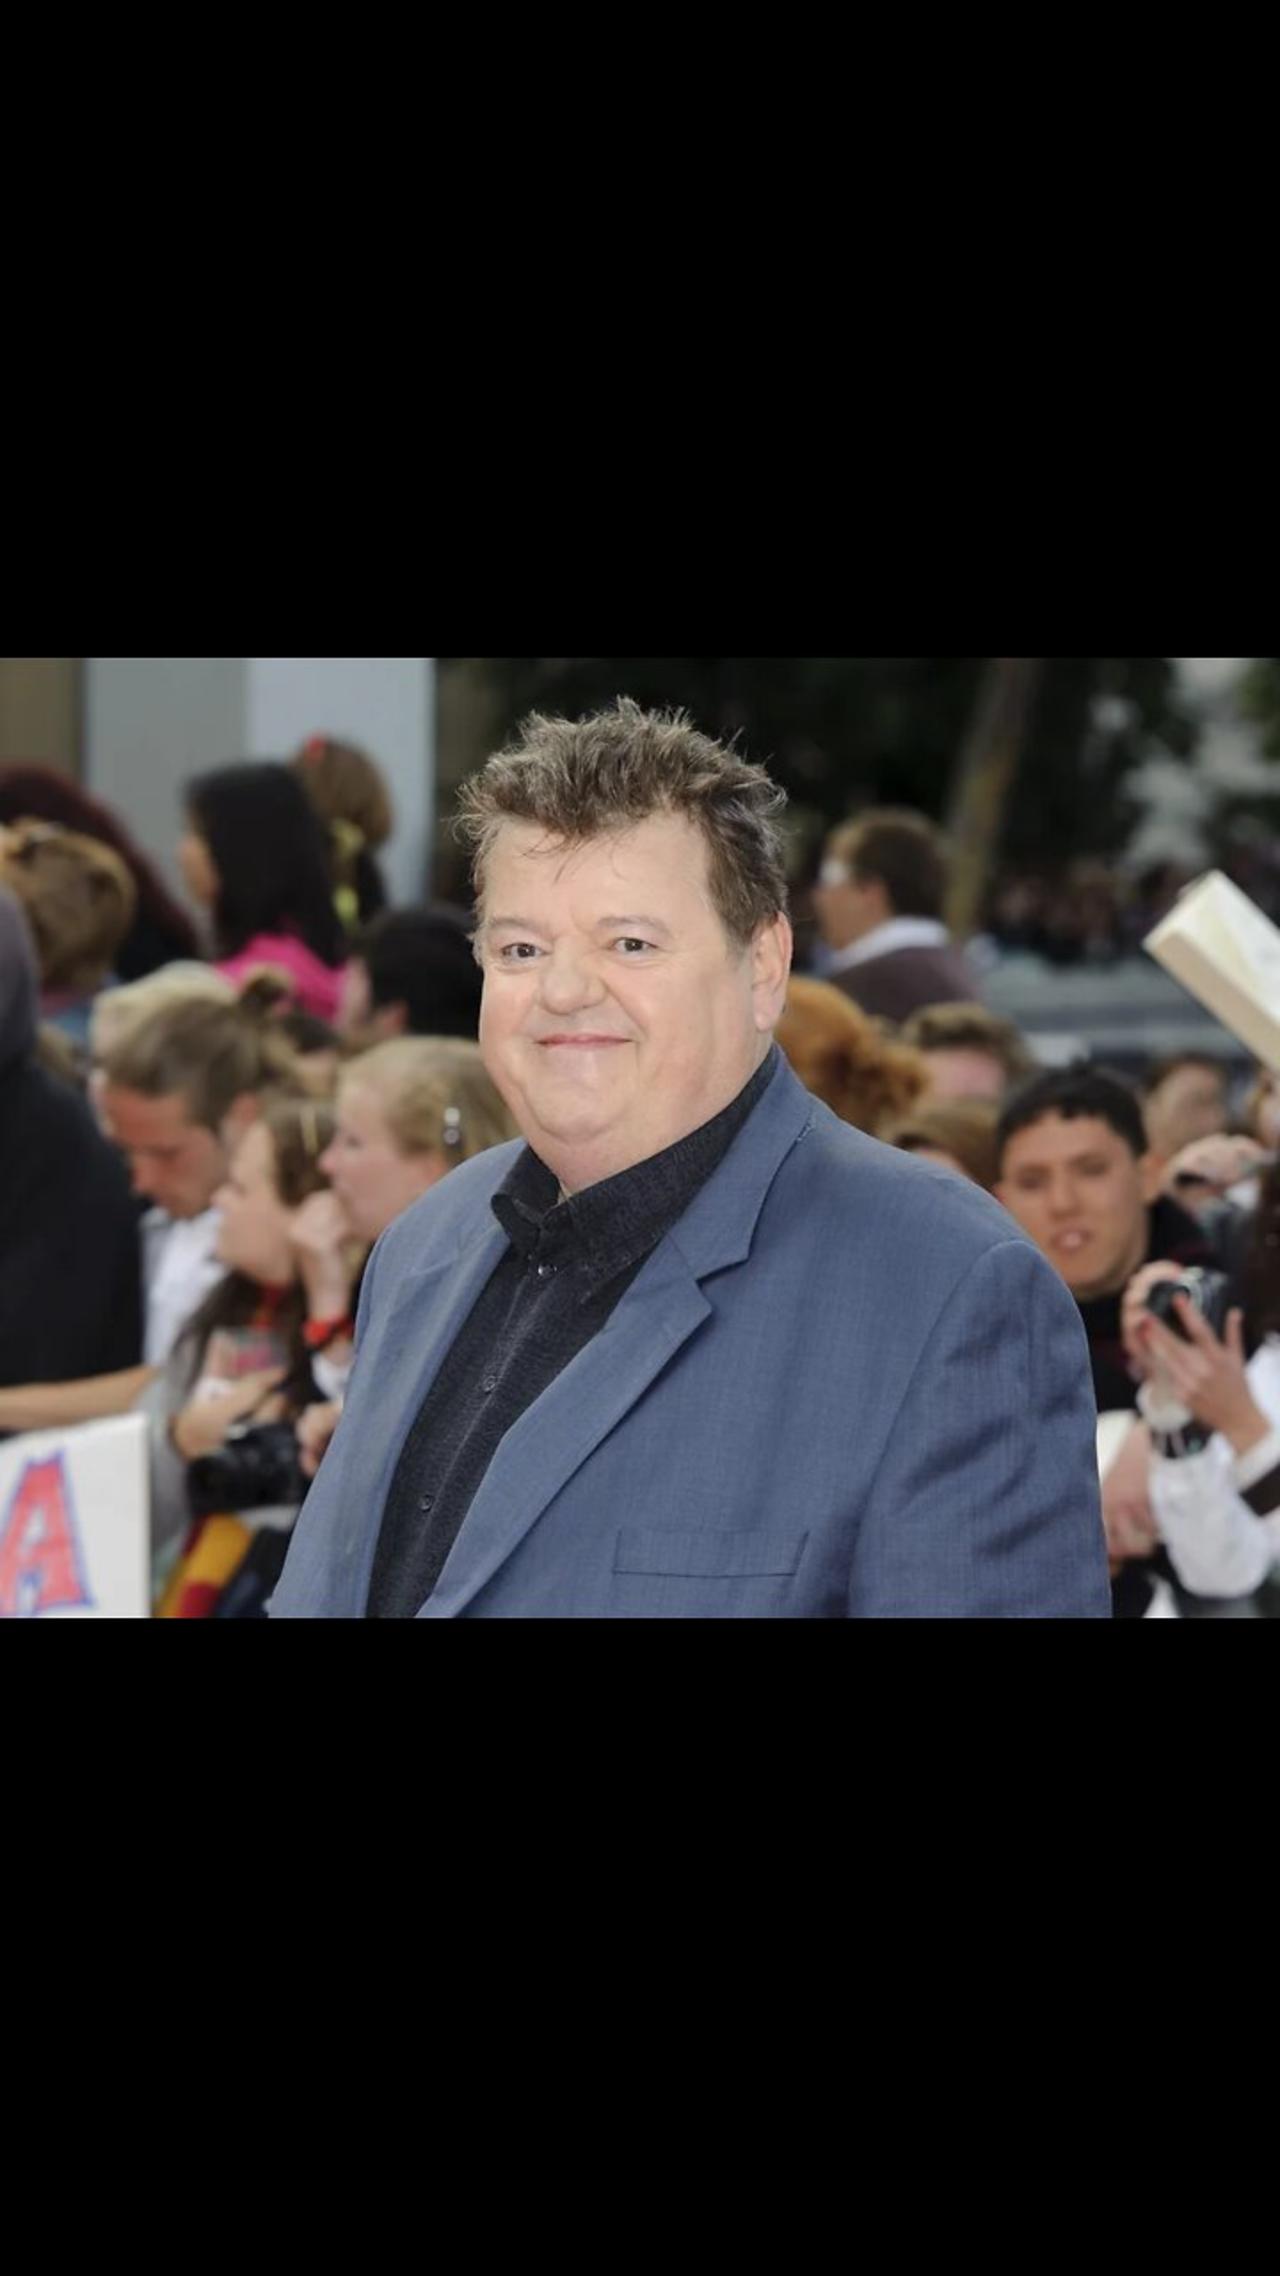 Actor Robbie Coltrane, who played Harry Potter's Hagrid, dies at age 72